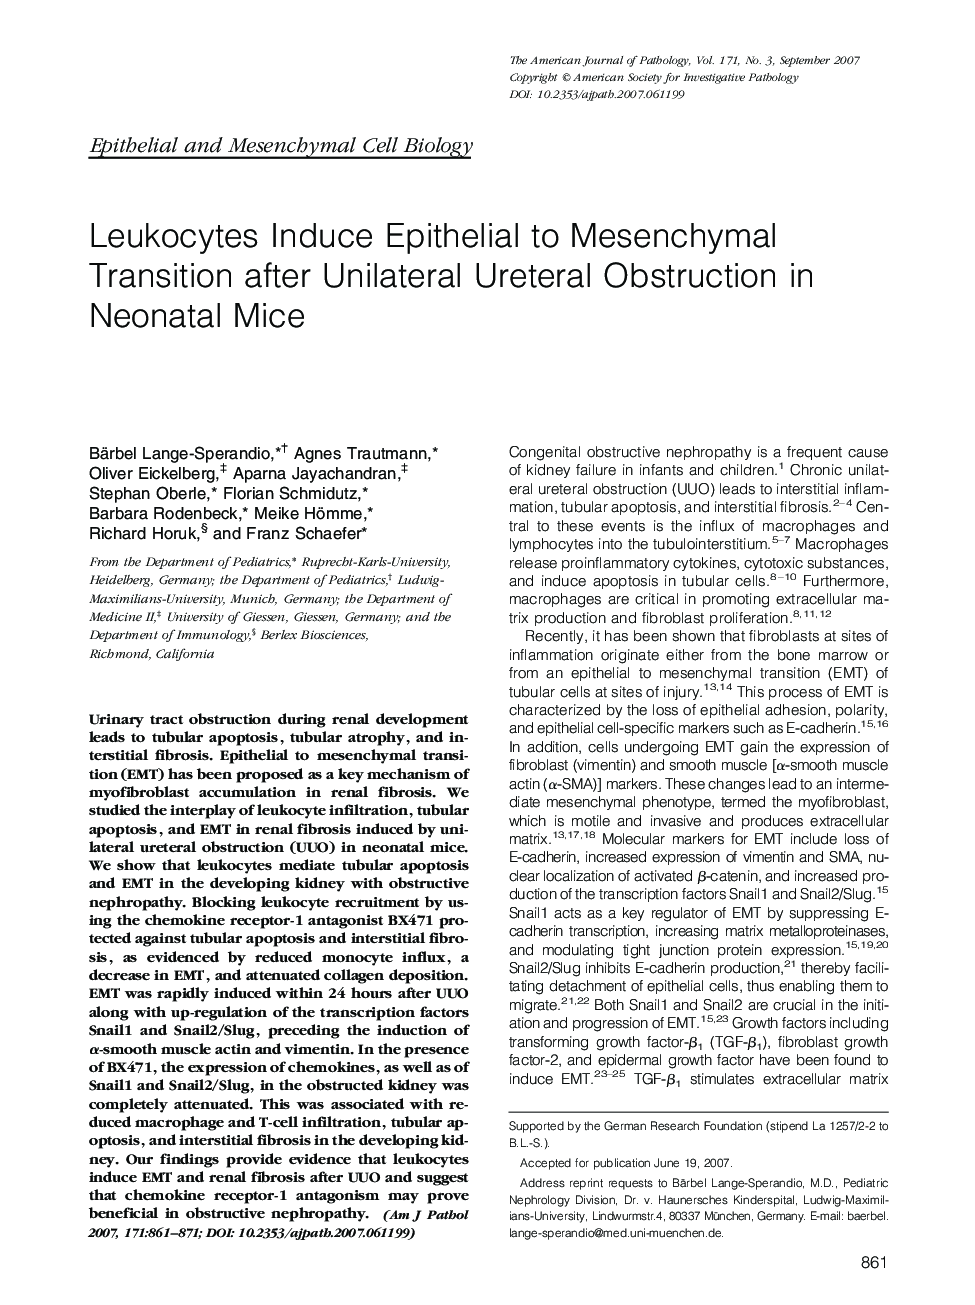 Regular ArticlesLeukocytes Induce Epithelial to Mesenchymal Transition after Unilateral Ureteral Obstruction in Neonatal Mice